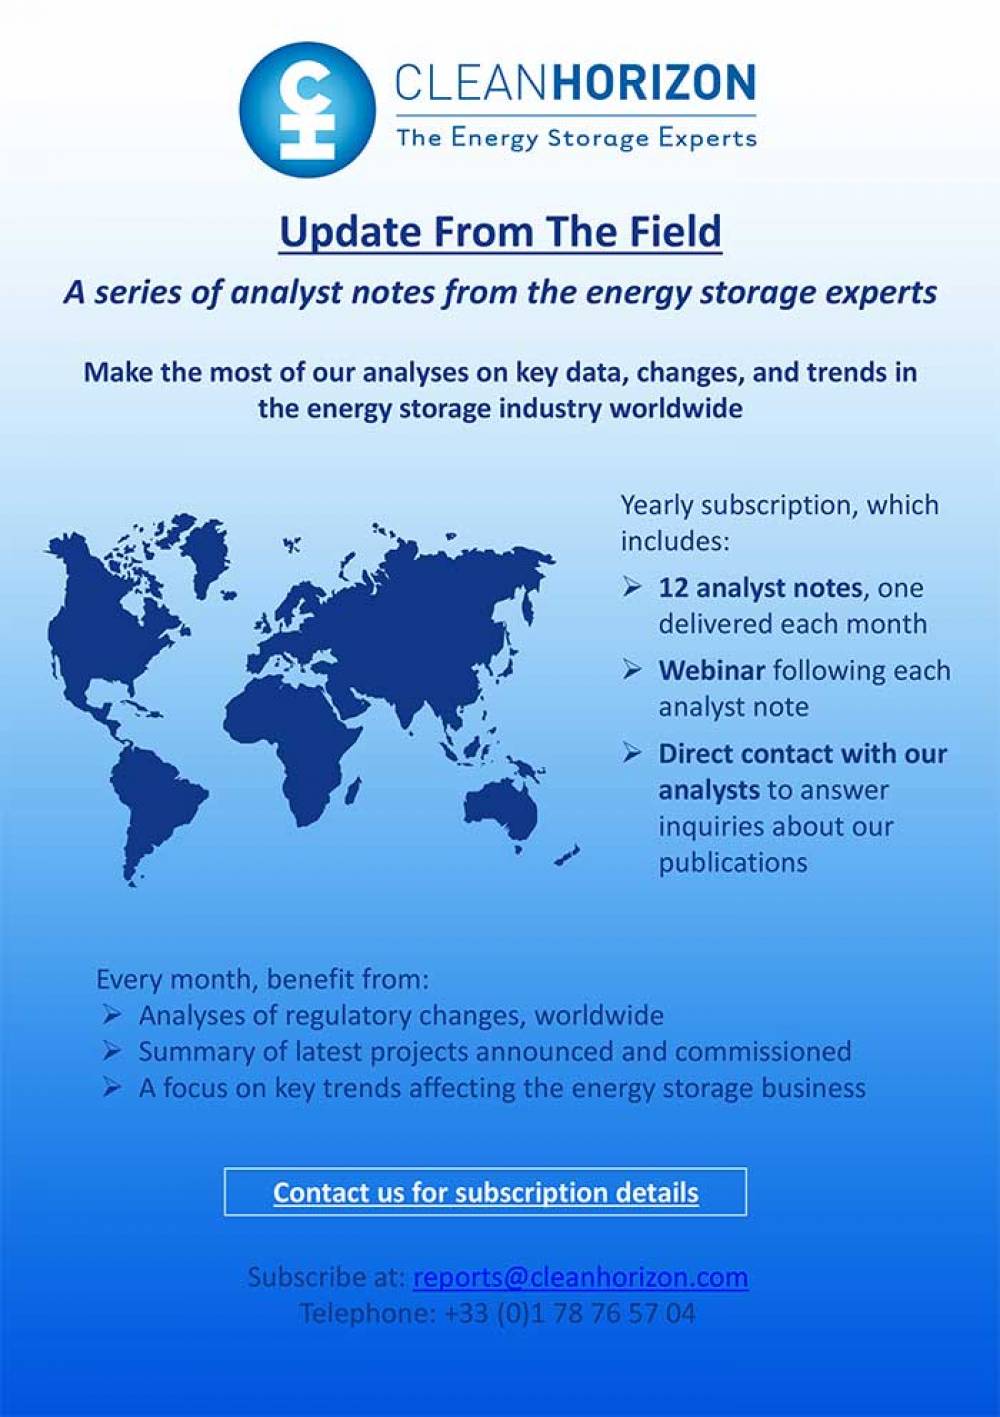 Update From The Field March 2018: the market for energy storage in sub-Saharan Africa